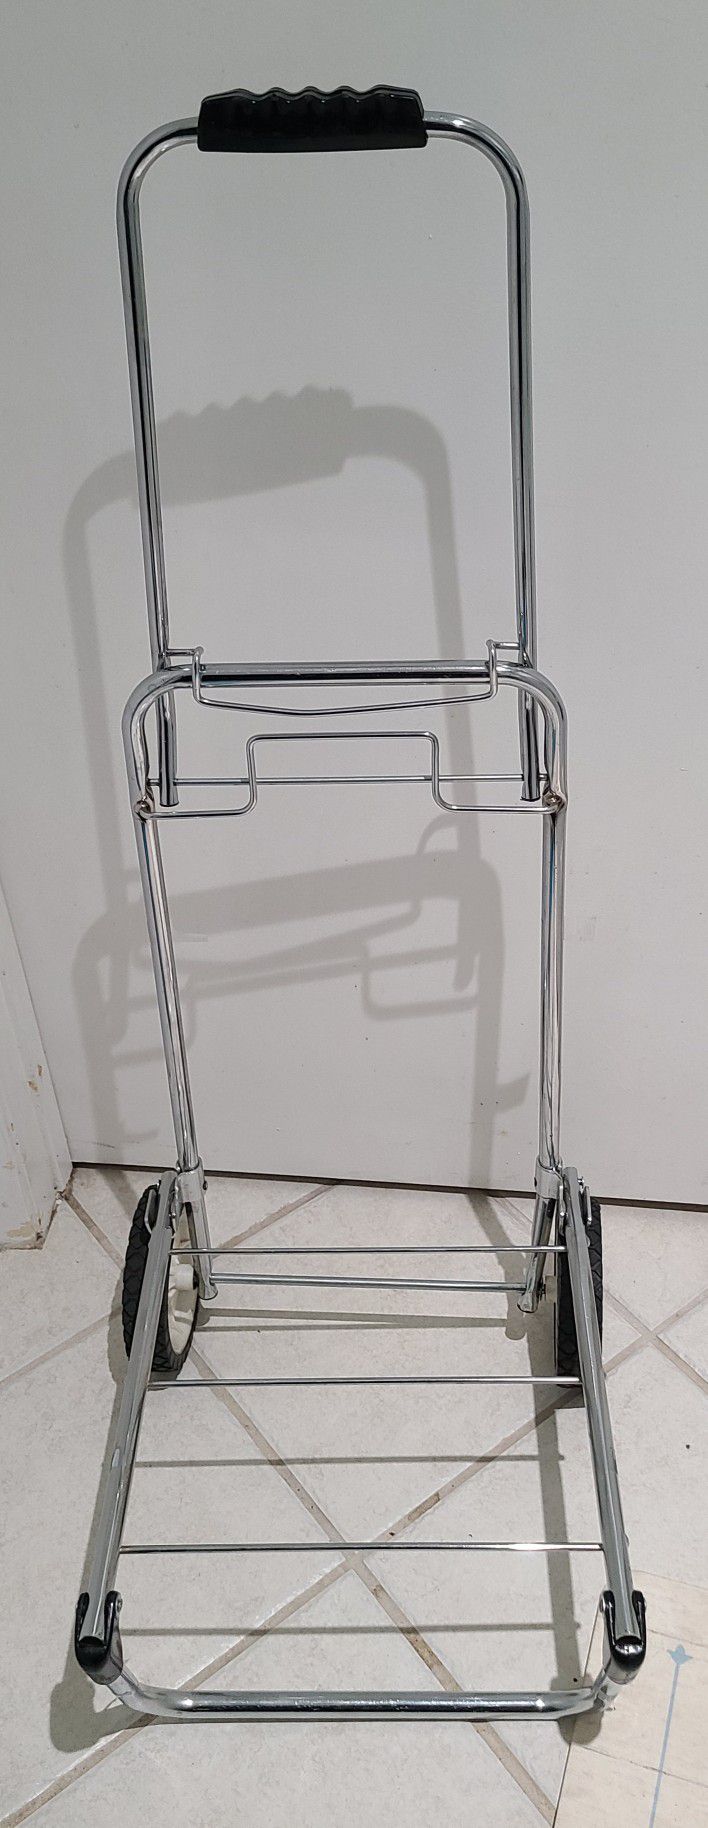 Foldable Compact Cart - FREE - Good Condition